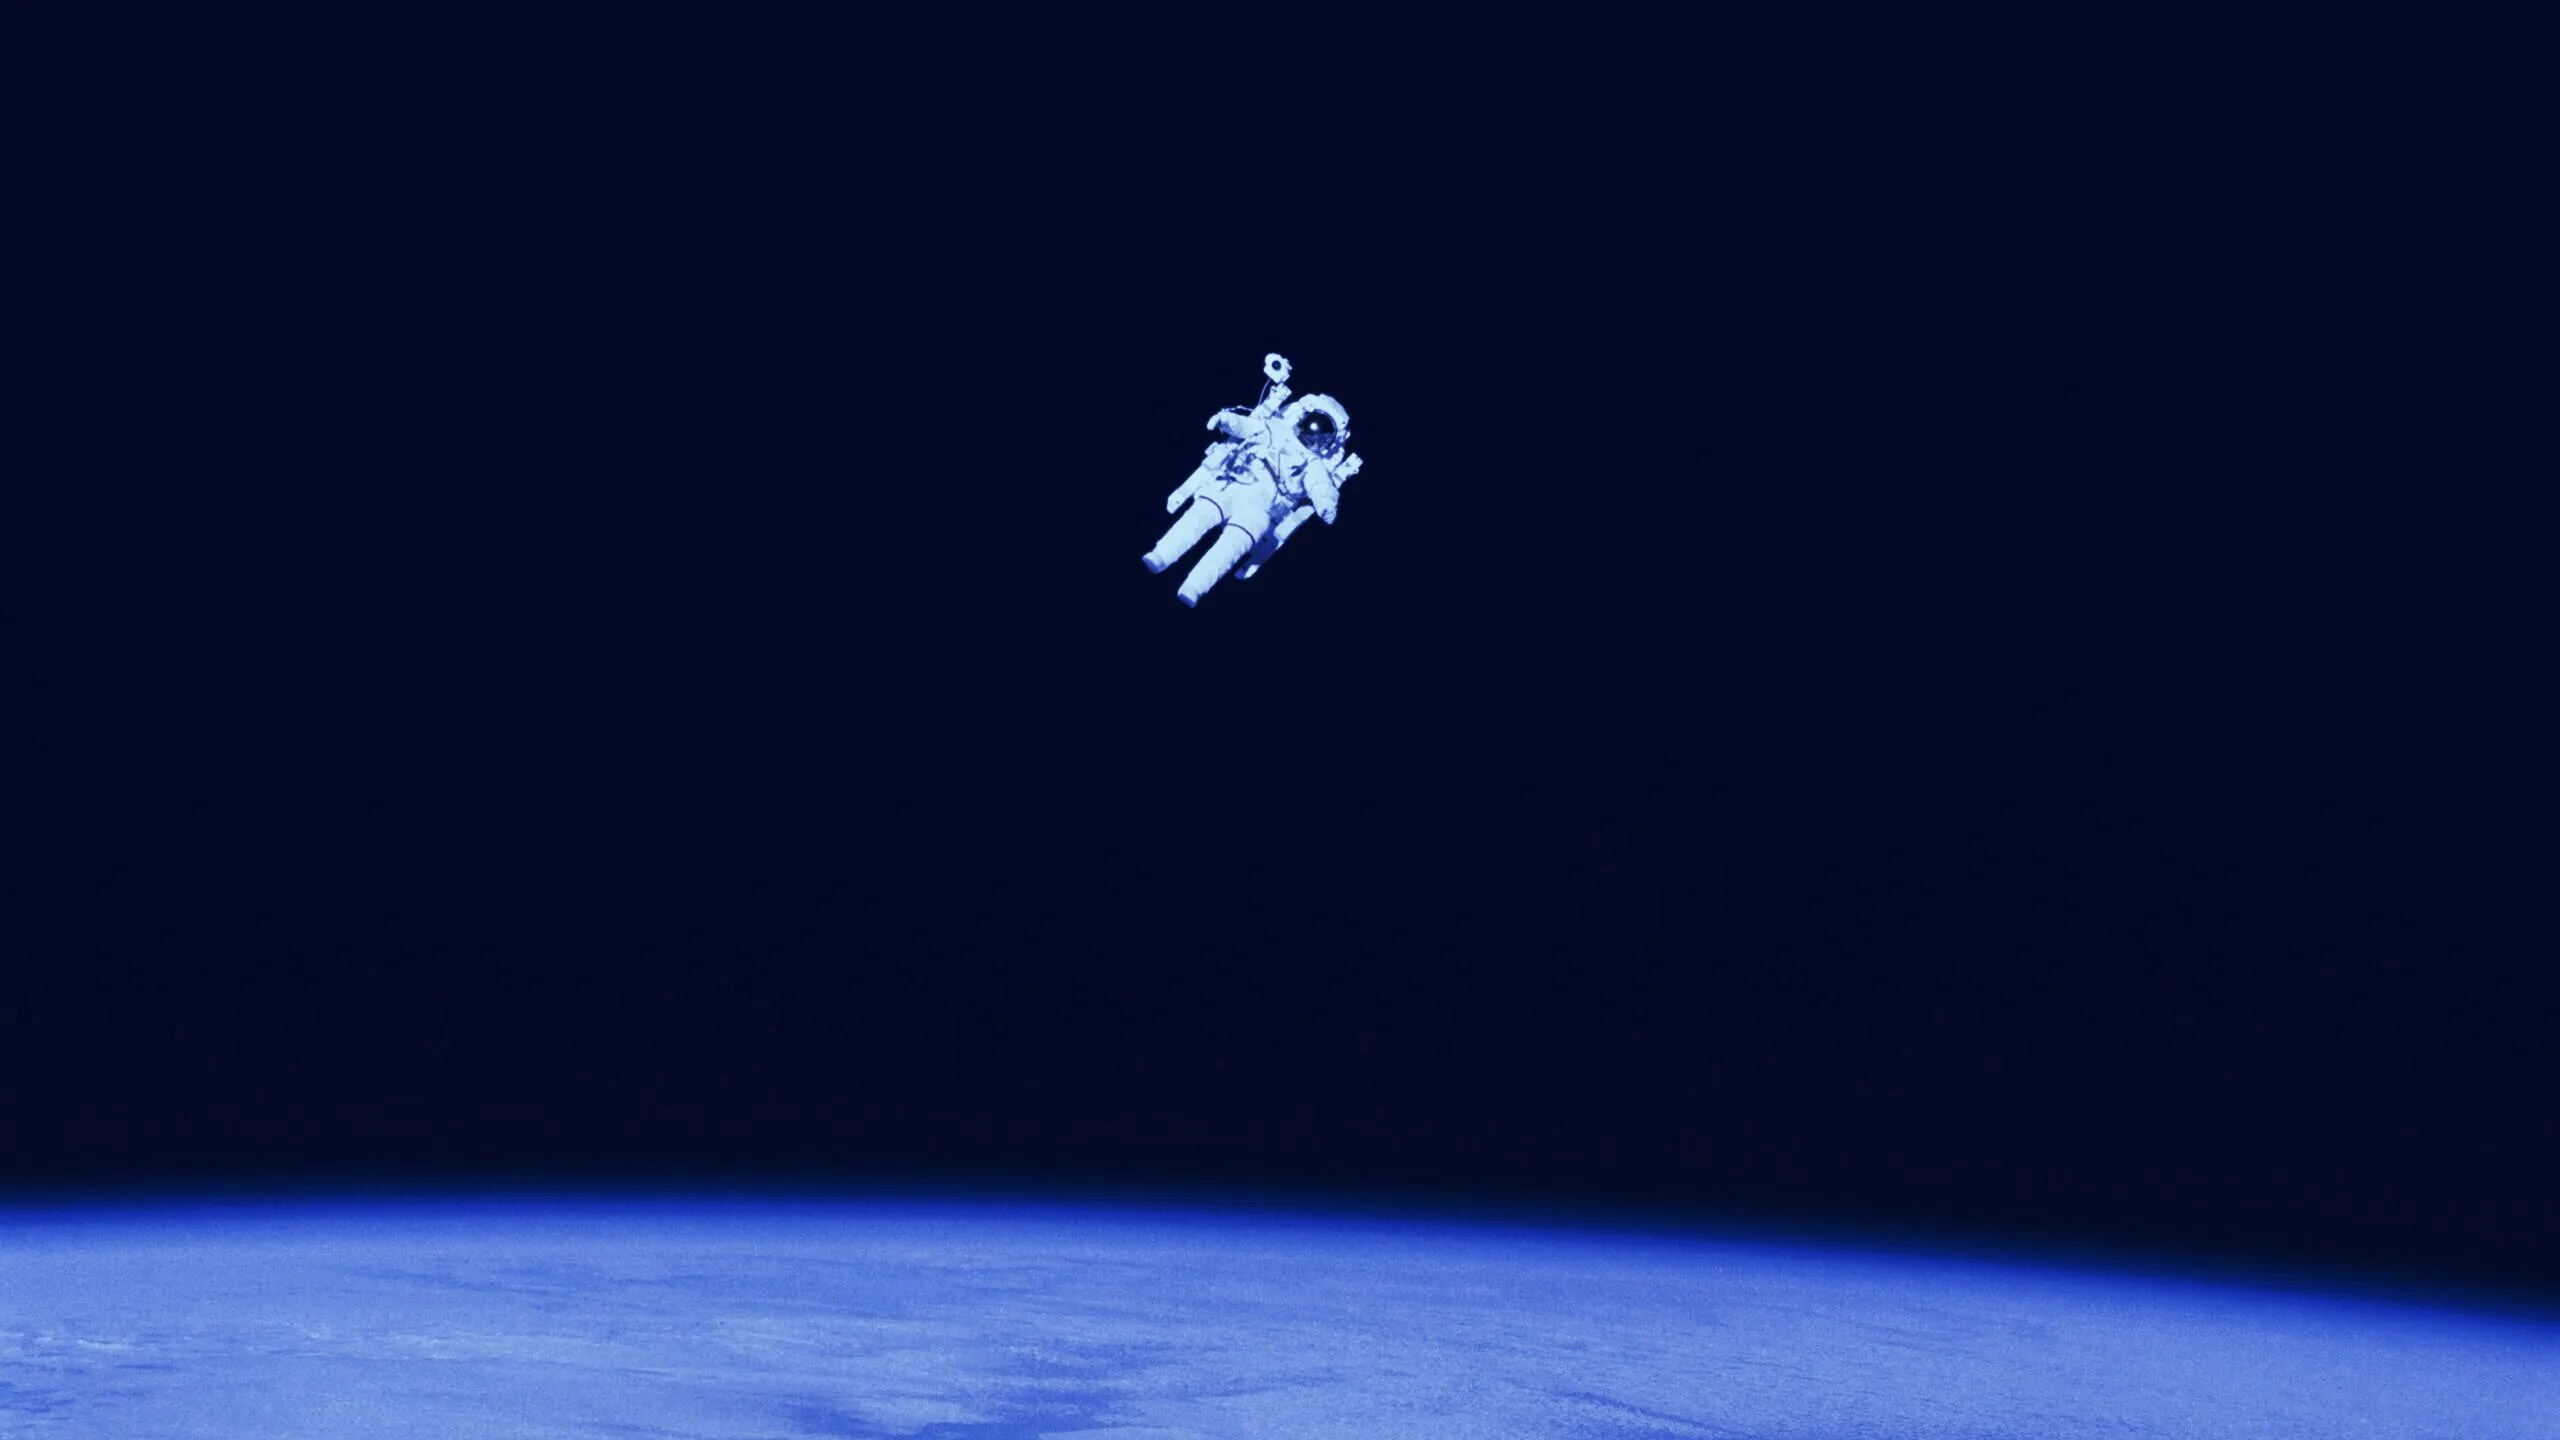 An astronaut in space. Image: Unsplash